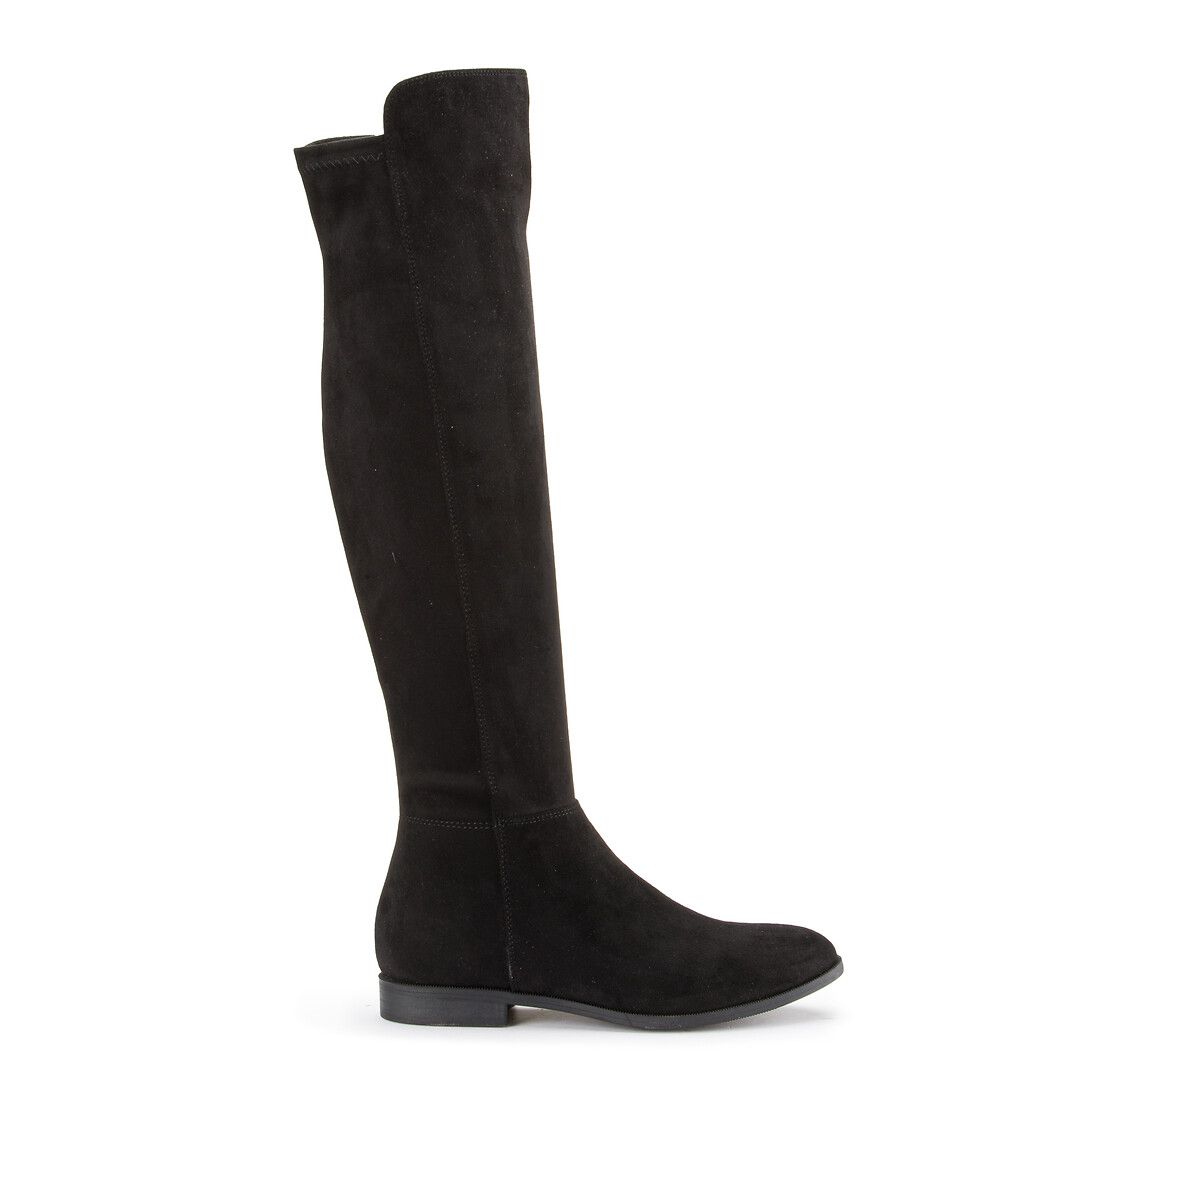 Recycled Over-The-Knee Boots with Flat Heel | La Redoute (UK)